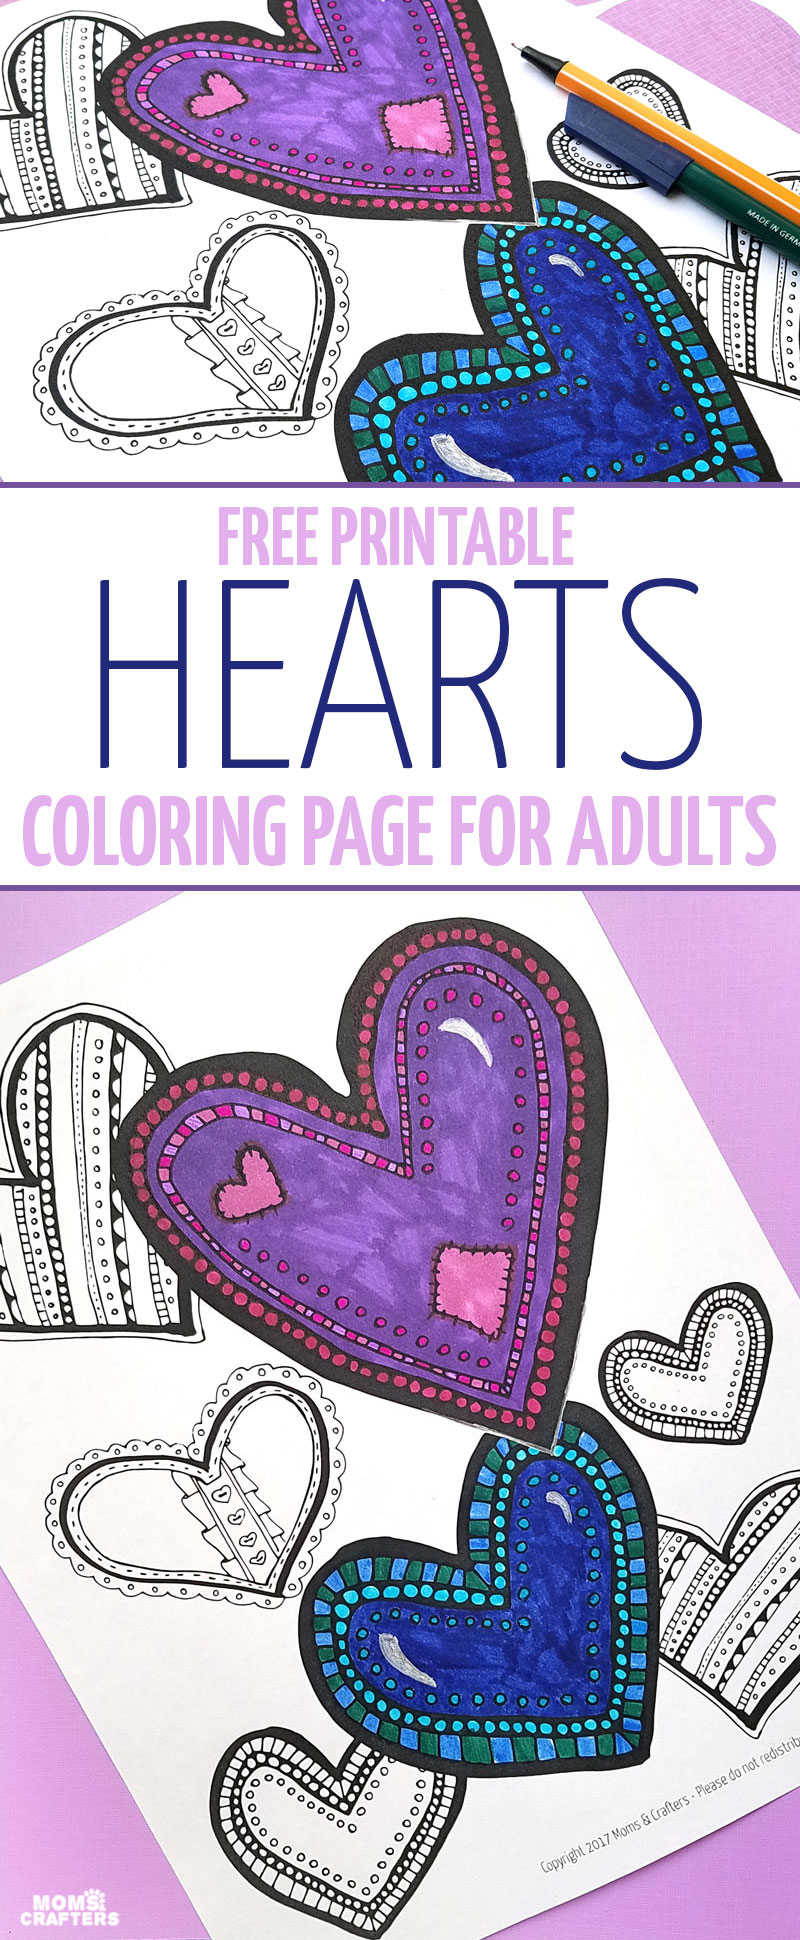 Heart coloring page a free printable coloring page for adults